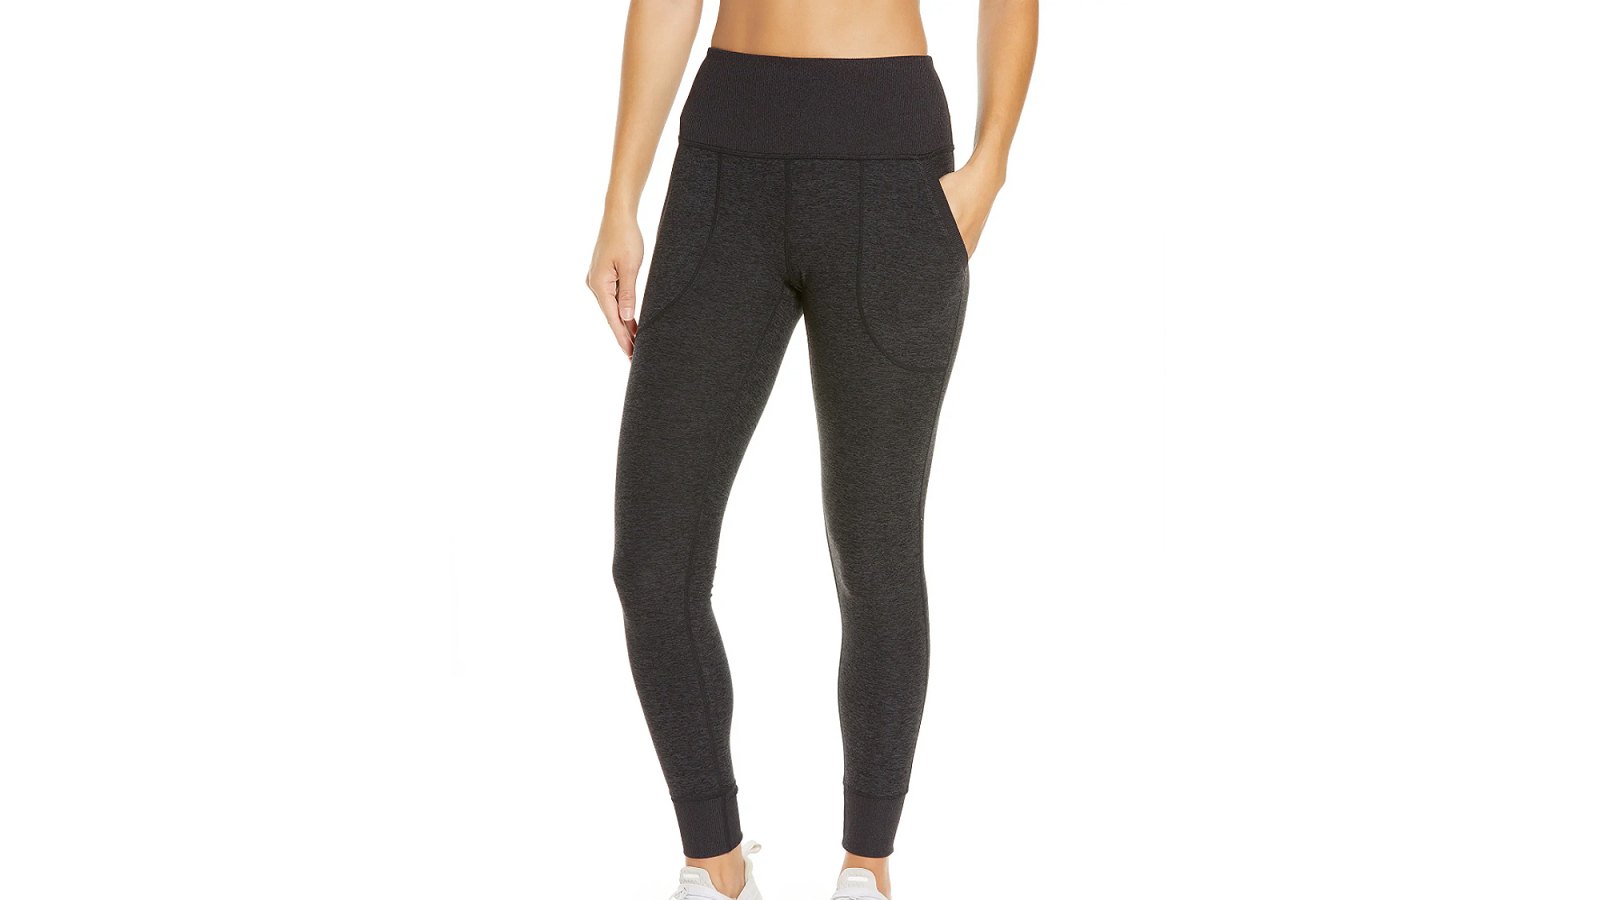 Nordstorm's Best-Selling Zella Leggings Are 25% Off Right Now